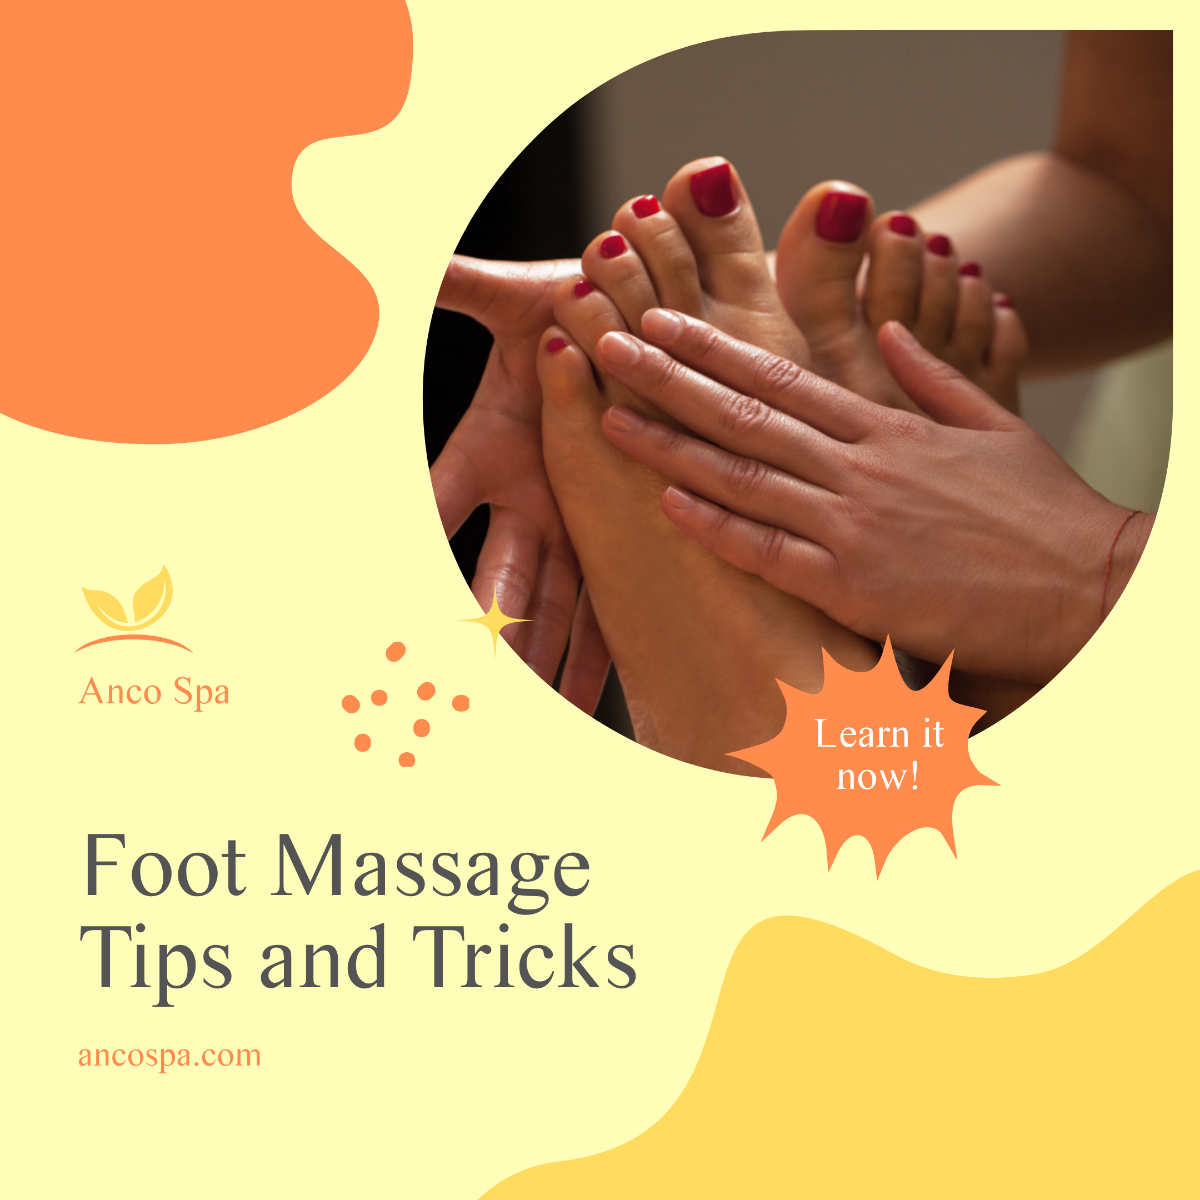 Free Foot Massage Tips And Tricks Post, Instagram, Facebook Template